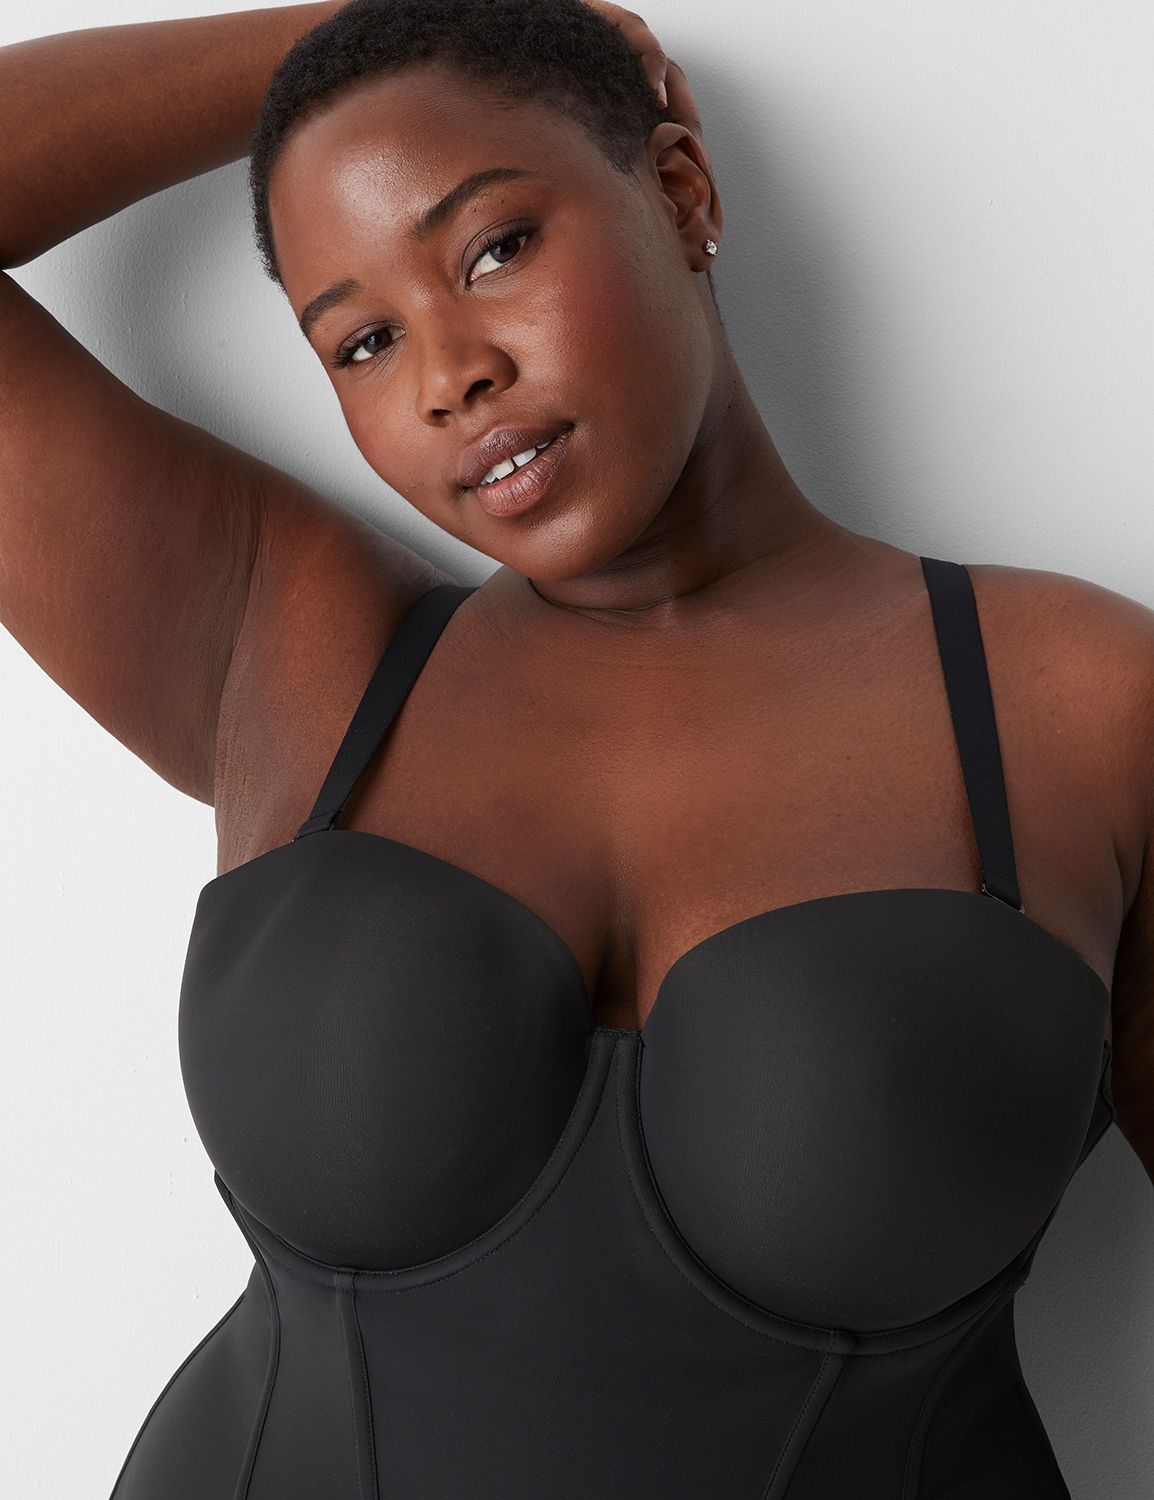 Lane Bryant - Meet our new Intuition bra. Also answers to “that